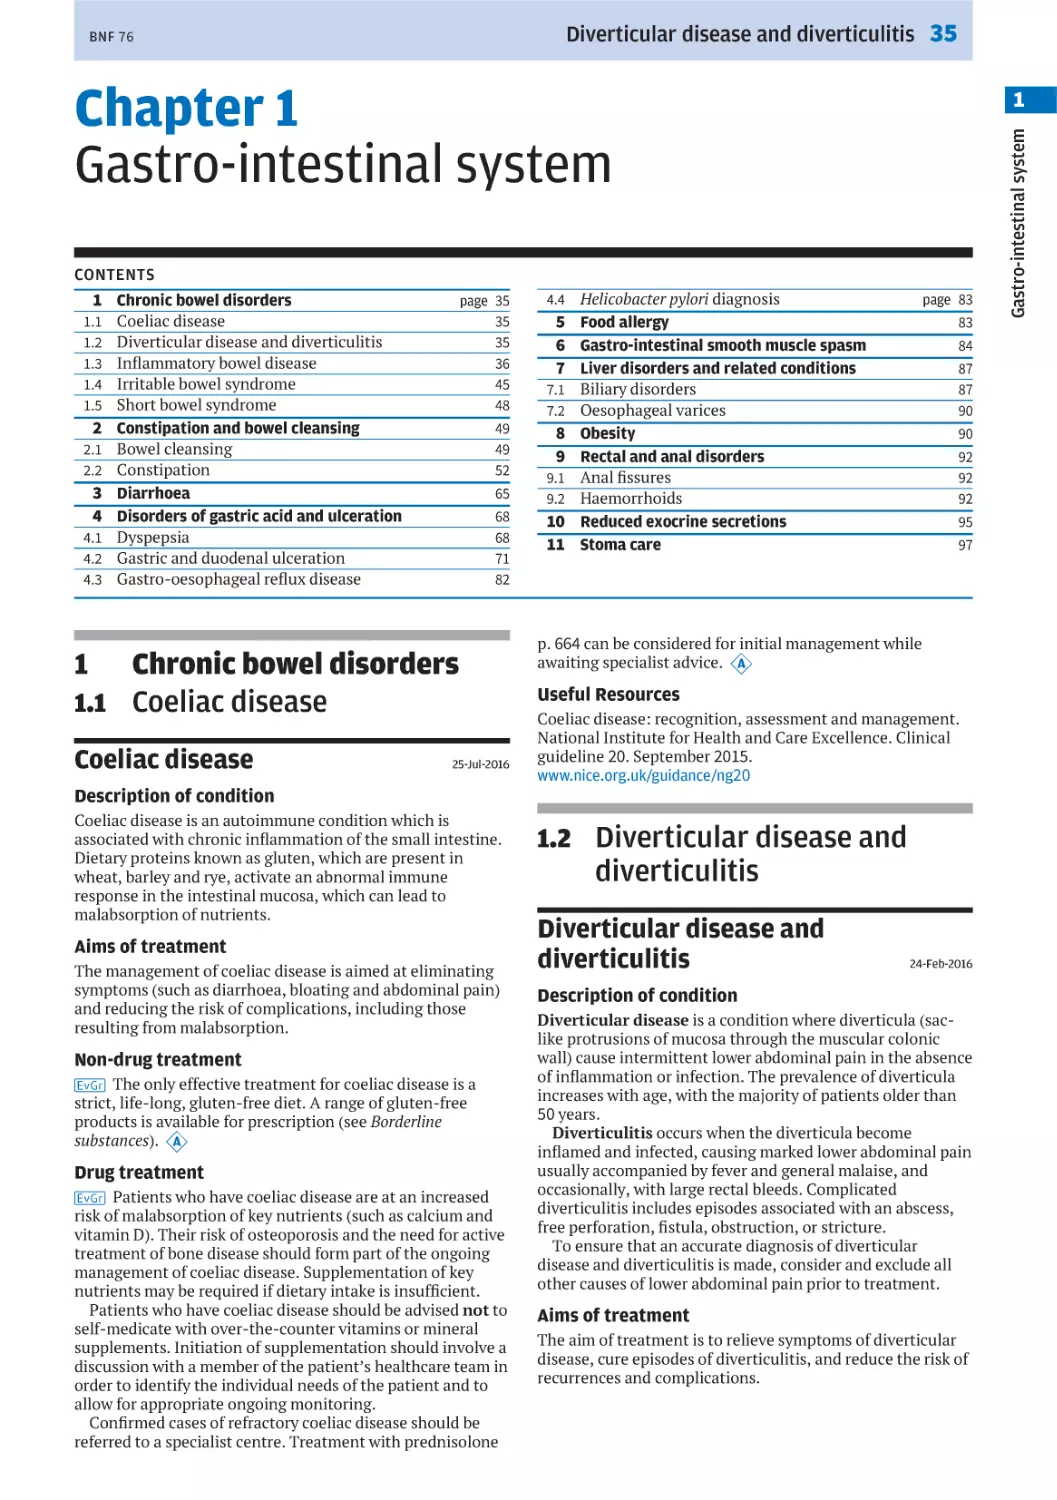 Chapter 1 Gastro-intestinal system
Chronic bowel disorders